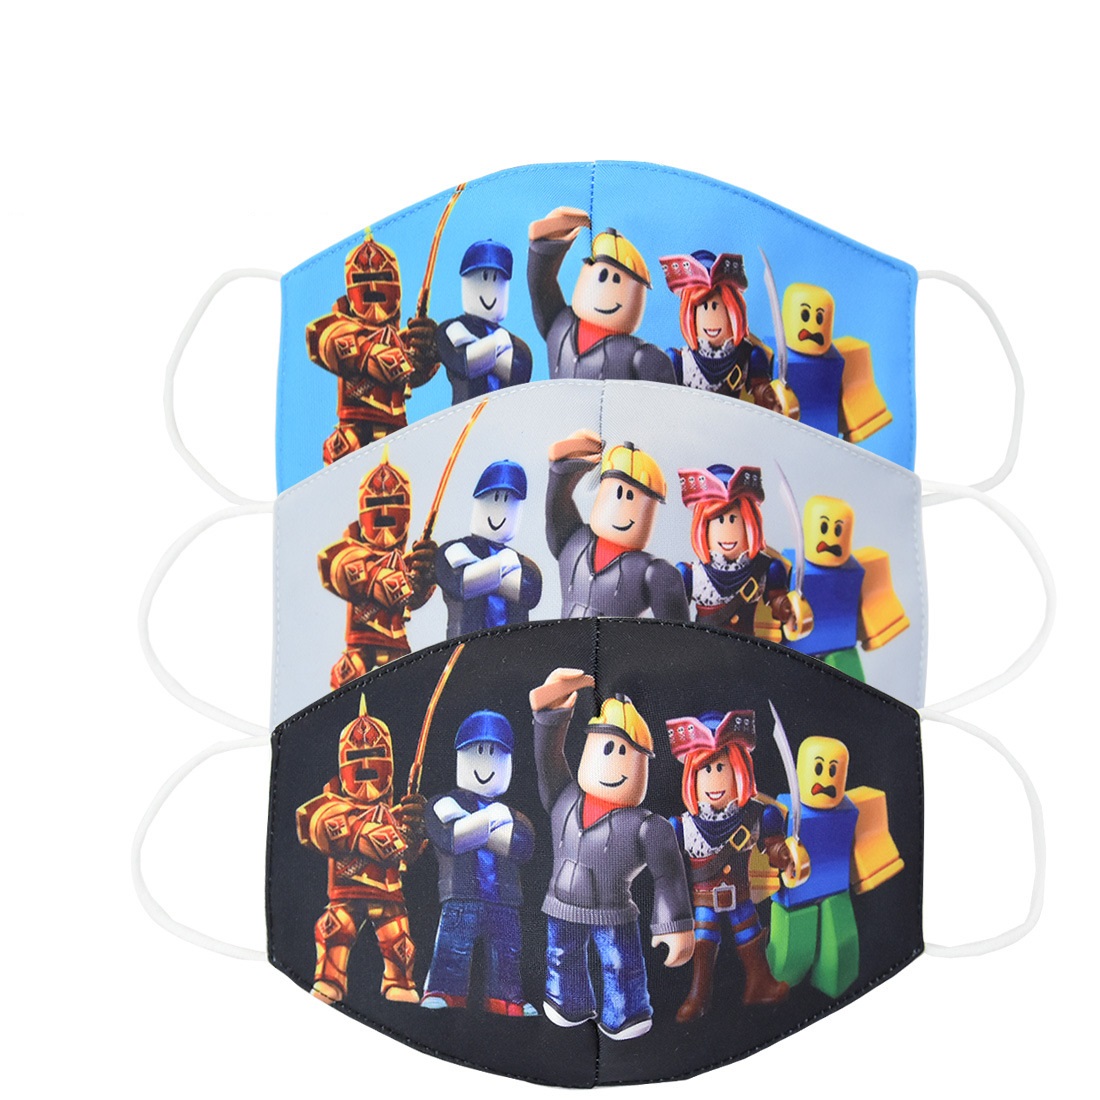 Roblox Printed Face Mask Cartoon Design Kids Baby Boys Cotton Masks Anti Dust Face Mask Shopee Indonesia - bendywith a mask roblox